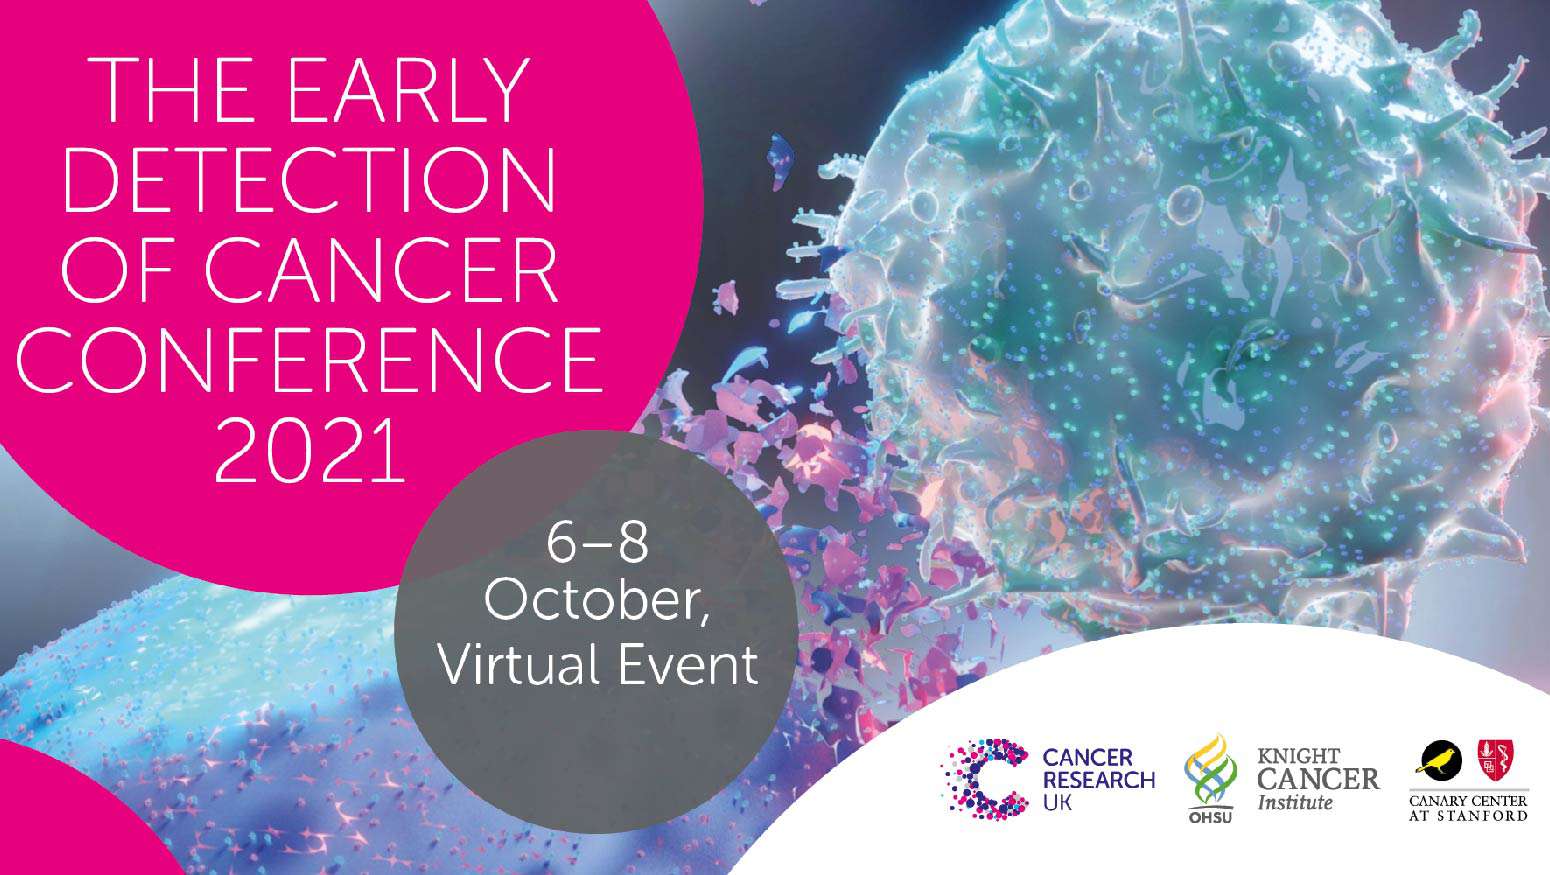 Early Detection of Cancer Conference (event image)